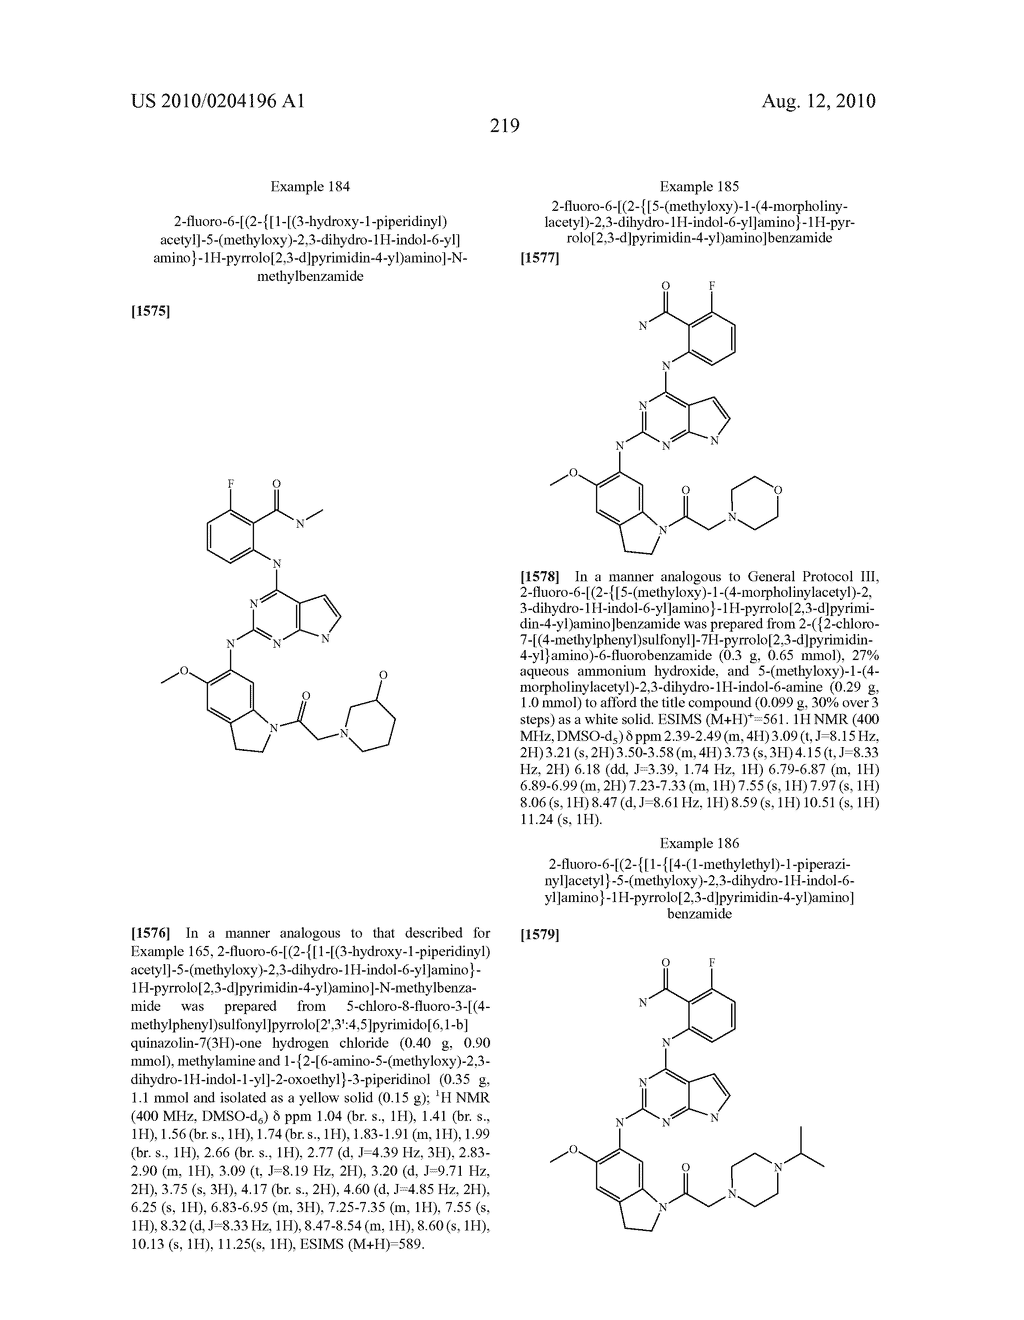 2-[2--1H-Pyrrolo[2,3-D]Pyrimidin-4-YL)Amino] Benzamide Derivatives As IGF-1R Inhibitors For The Treatment Of Cancer - diagram, schematic, and image 221